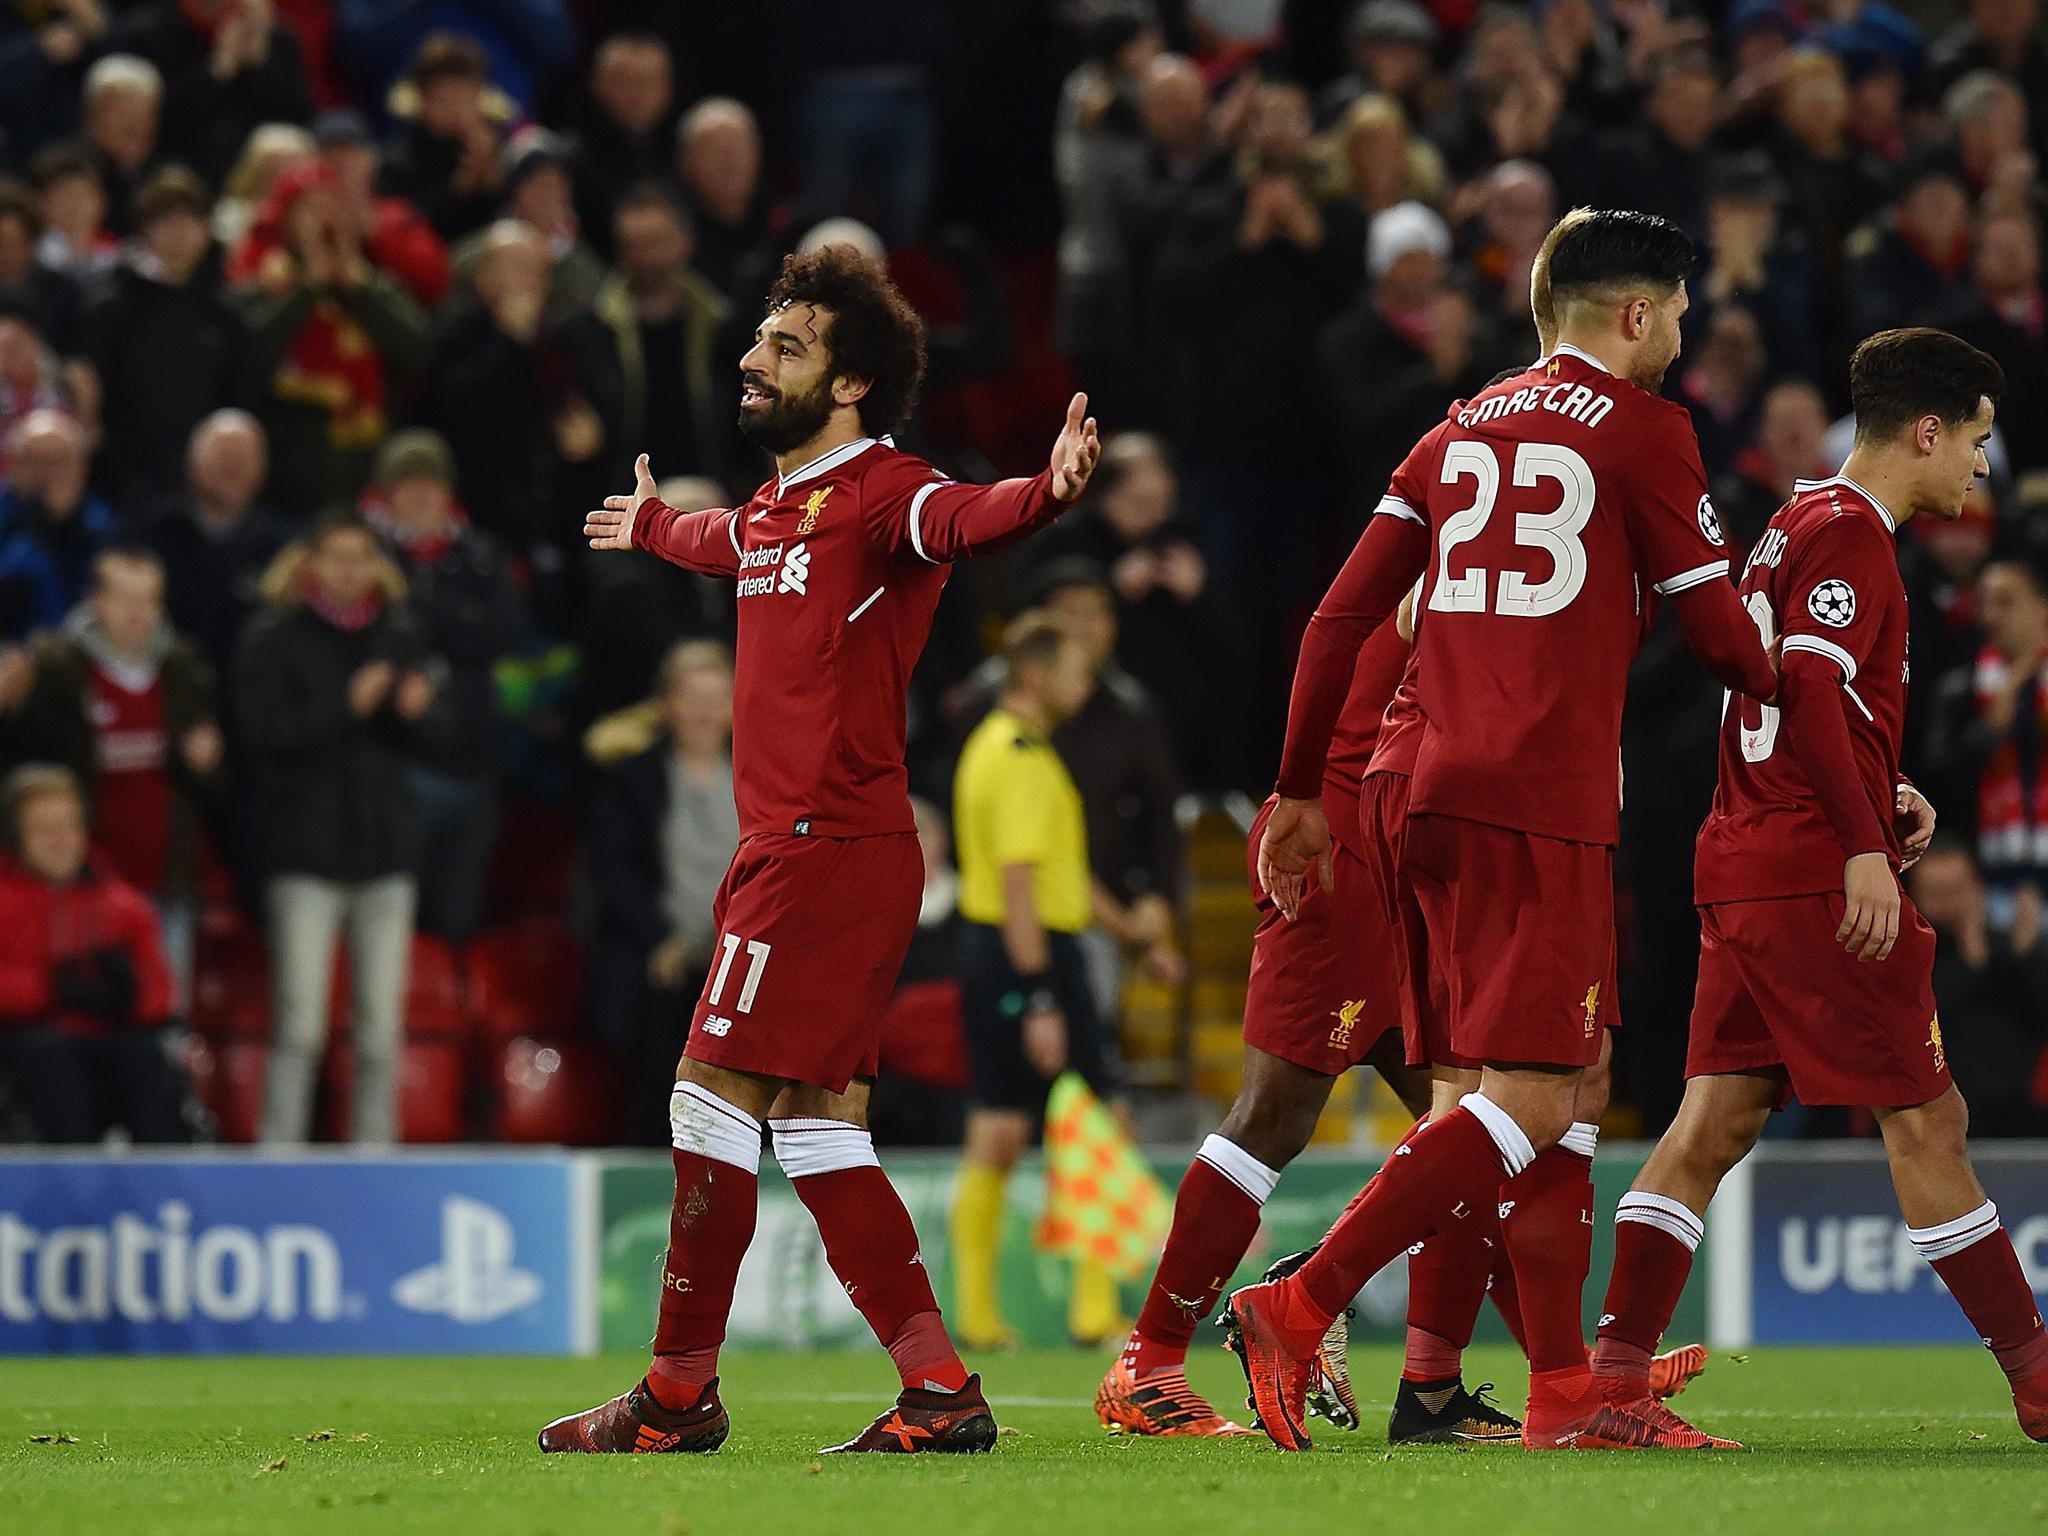 Mohamed Salah celebrates during Liverpool's 7-0 victory over Spartak Moscow